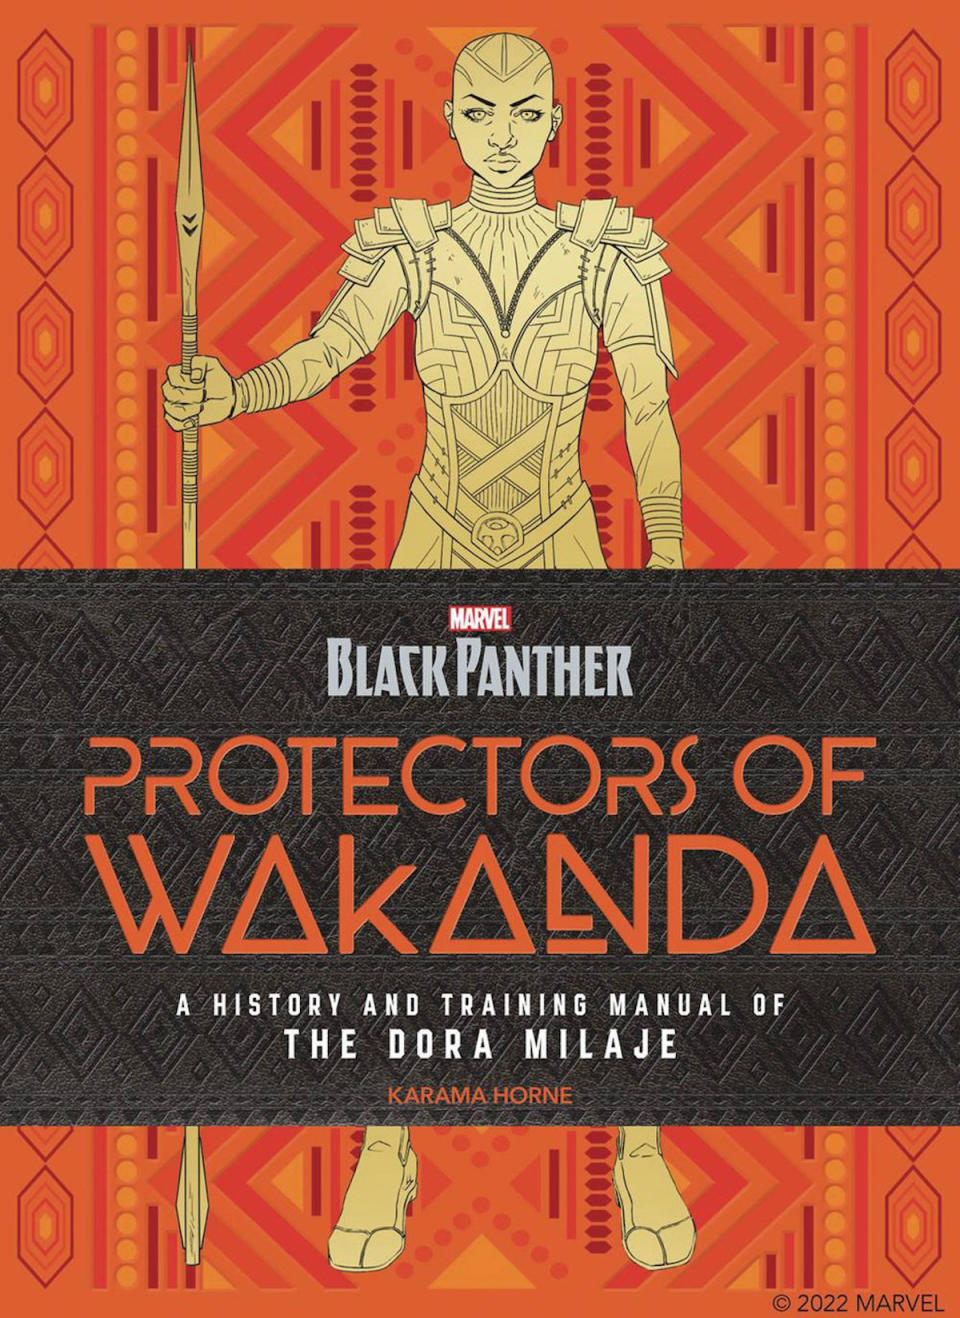 The front cover of Karama Horne's Book Black Panther: Protectors of Wakanda with a member of the Dora Milaje on the front